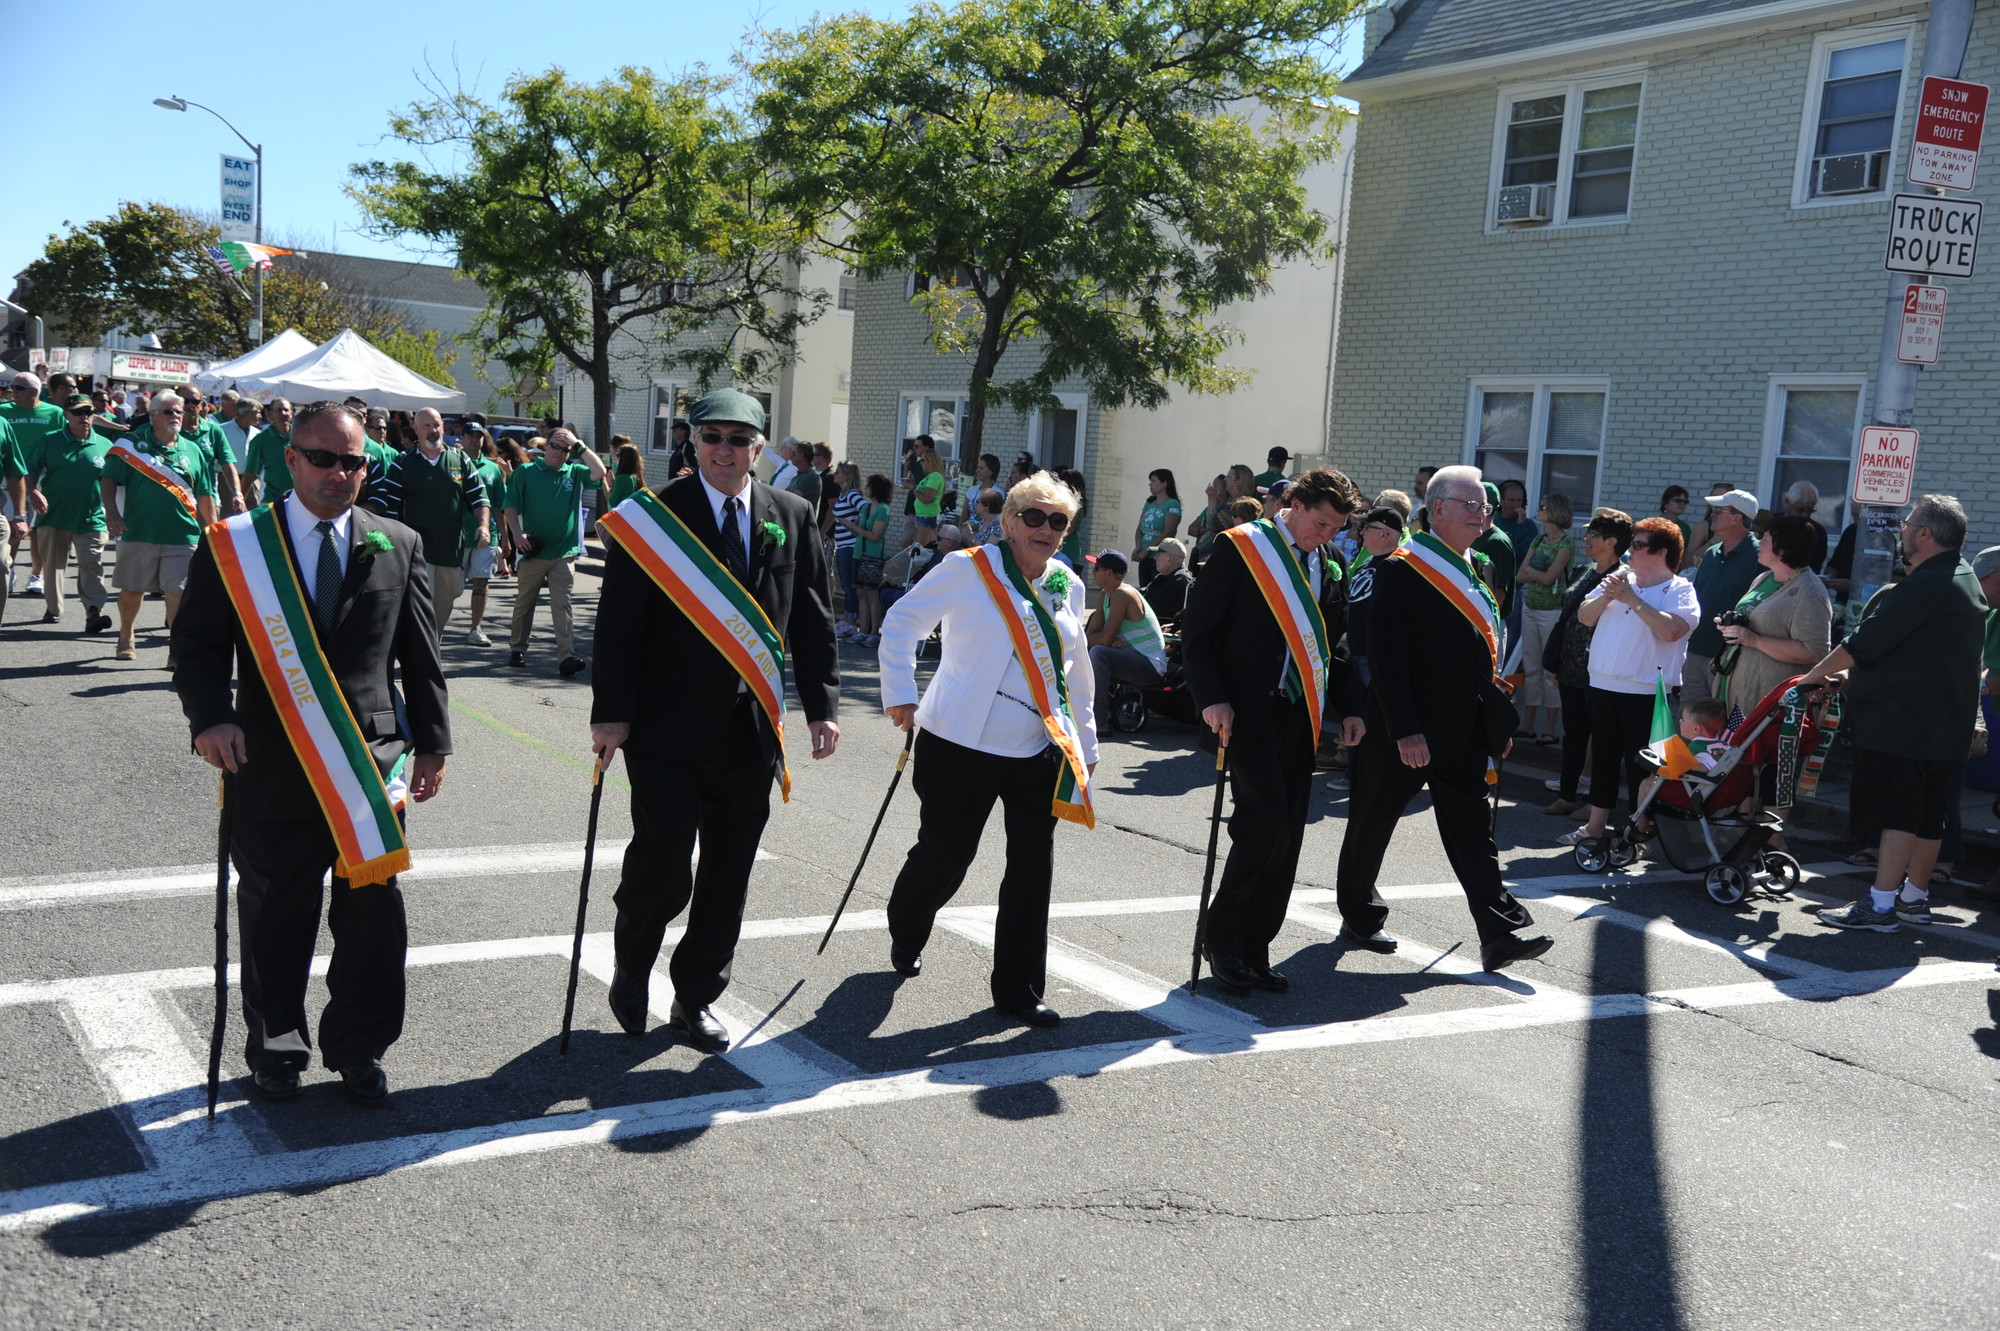 Members of the AOH Division 17 and parade honorees marched along West Beech Street.